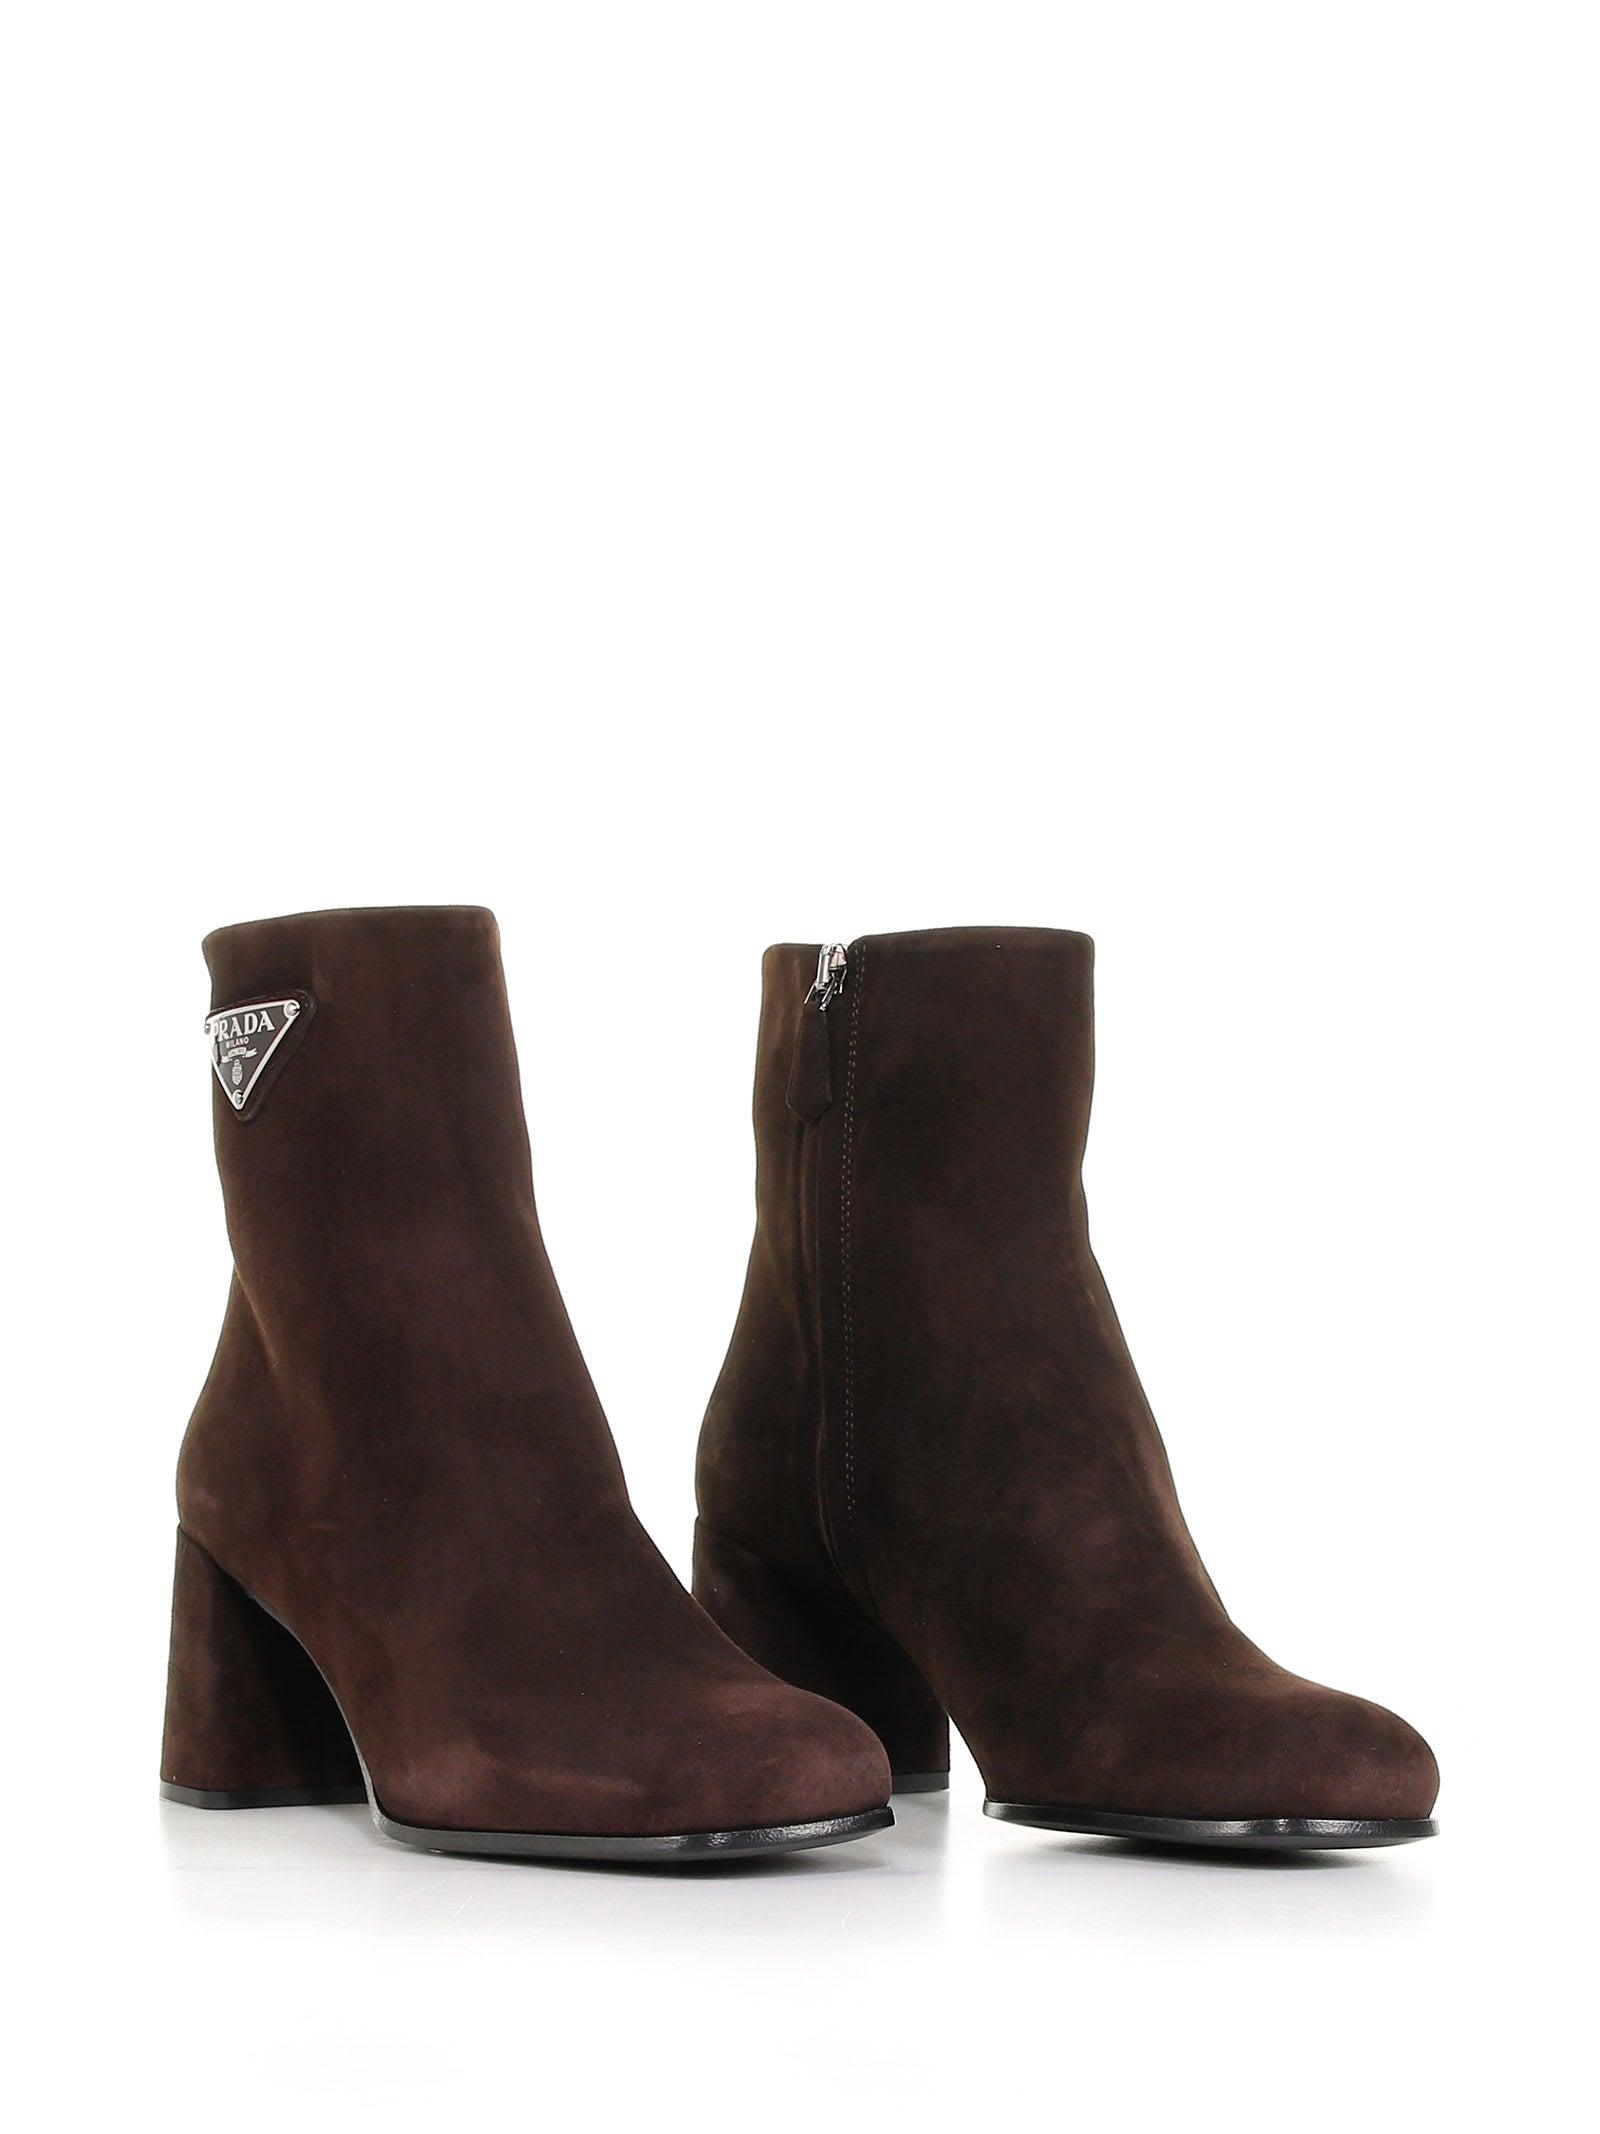 Prada Suede Ankle Boot With Heel in Brown | Lyst